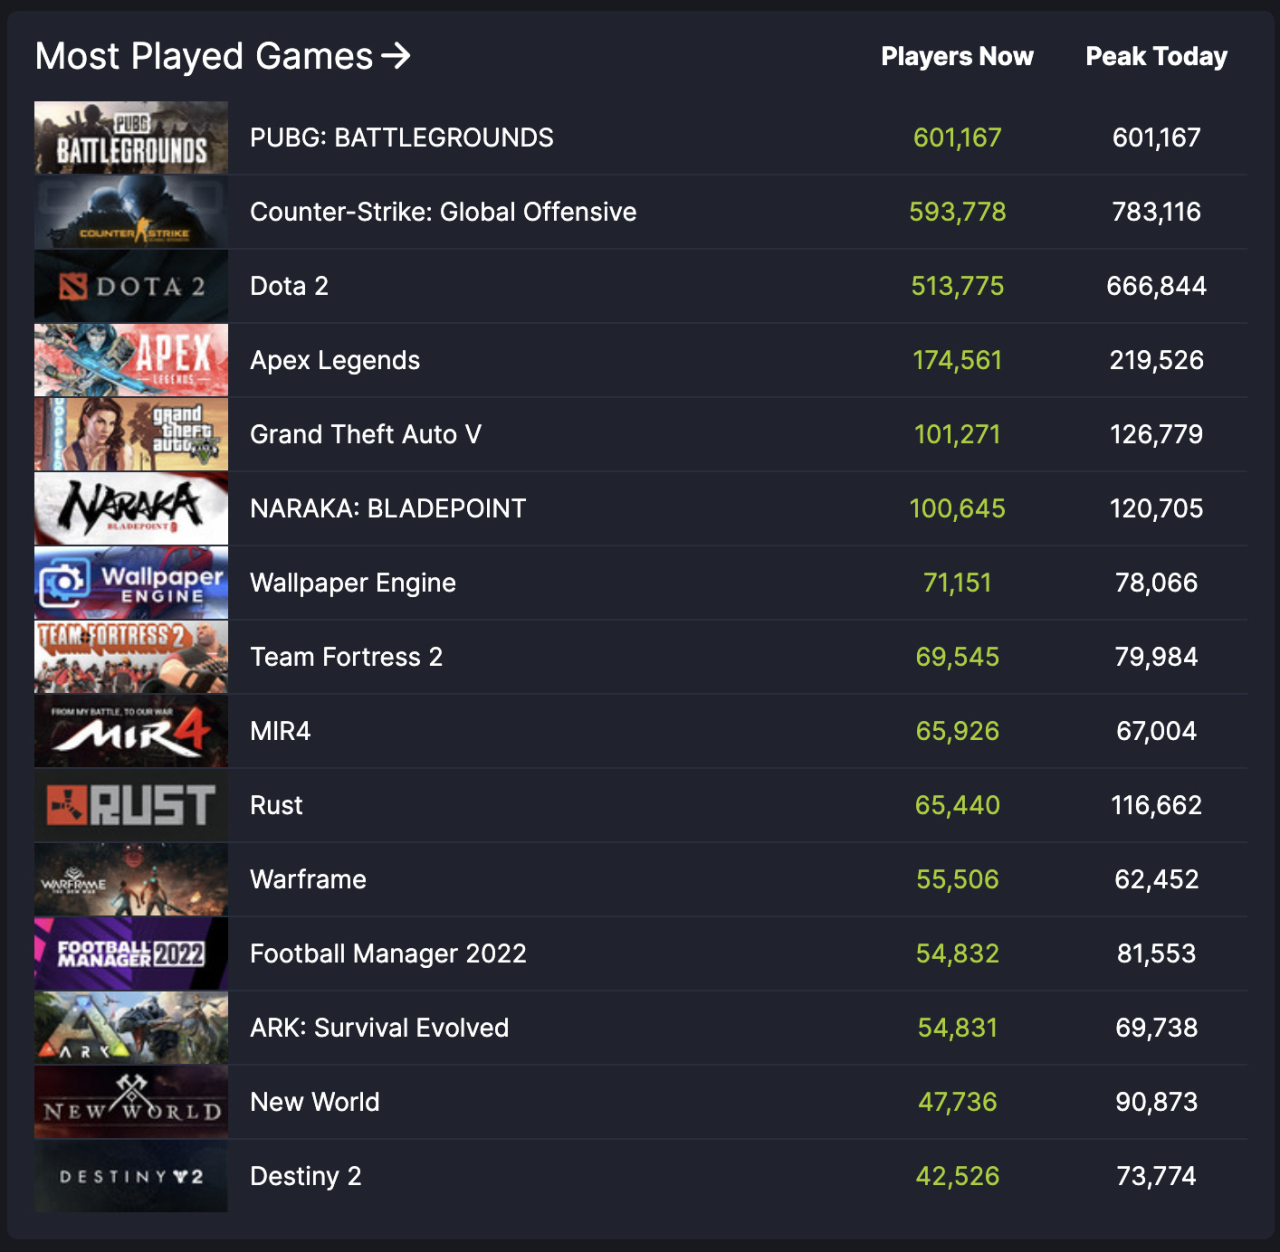 “PUBG: Battlegrounds” topped Steam’s most played games chart on Thursday.